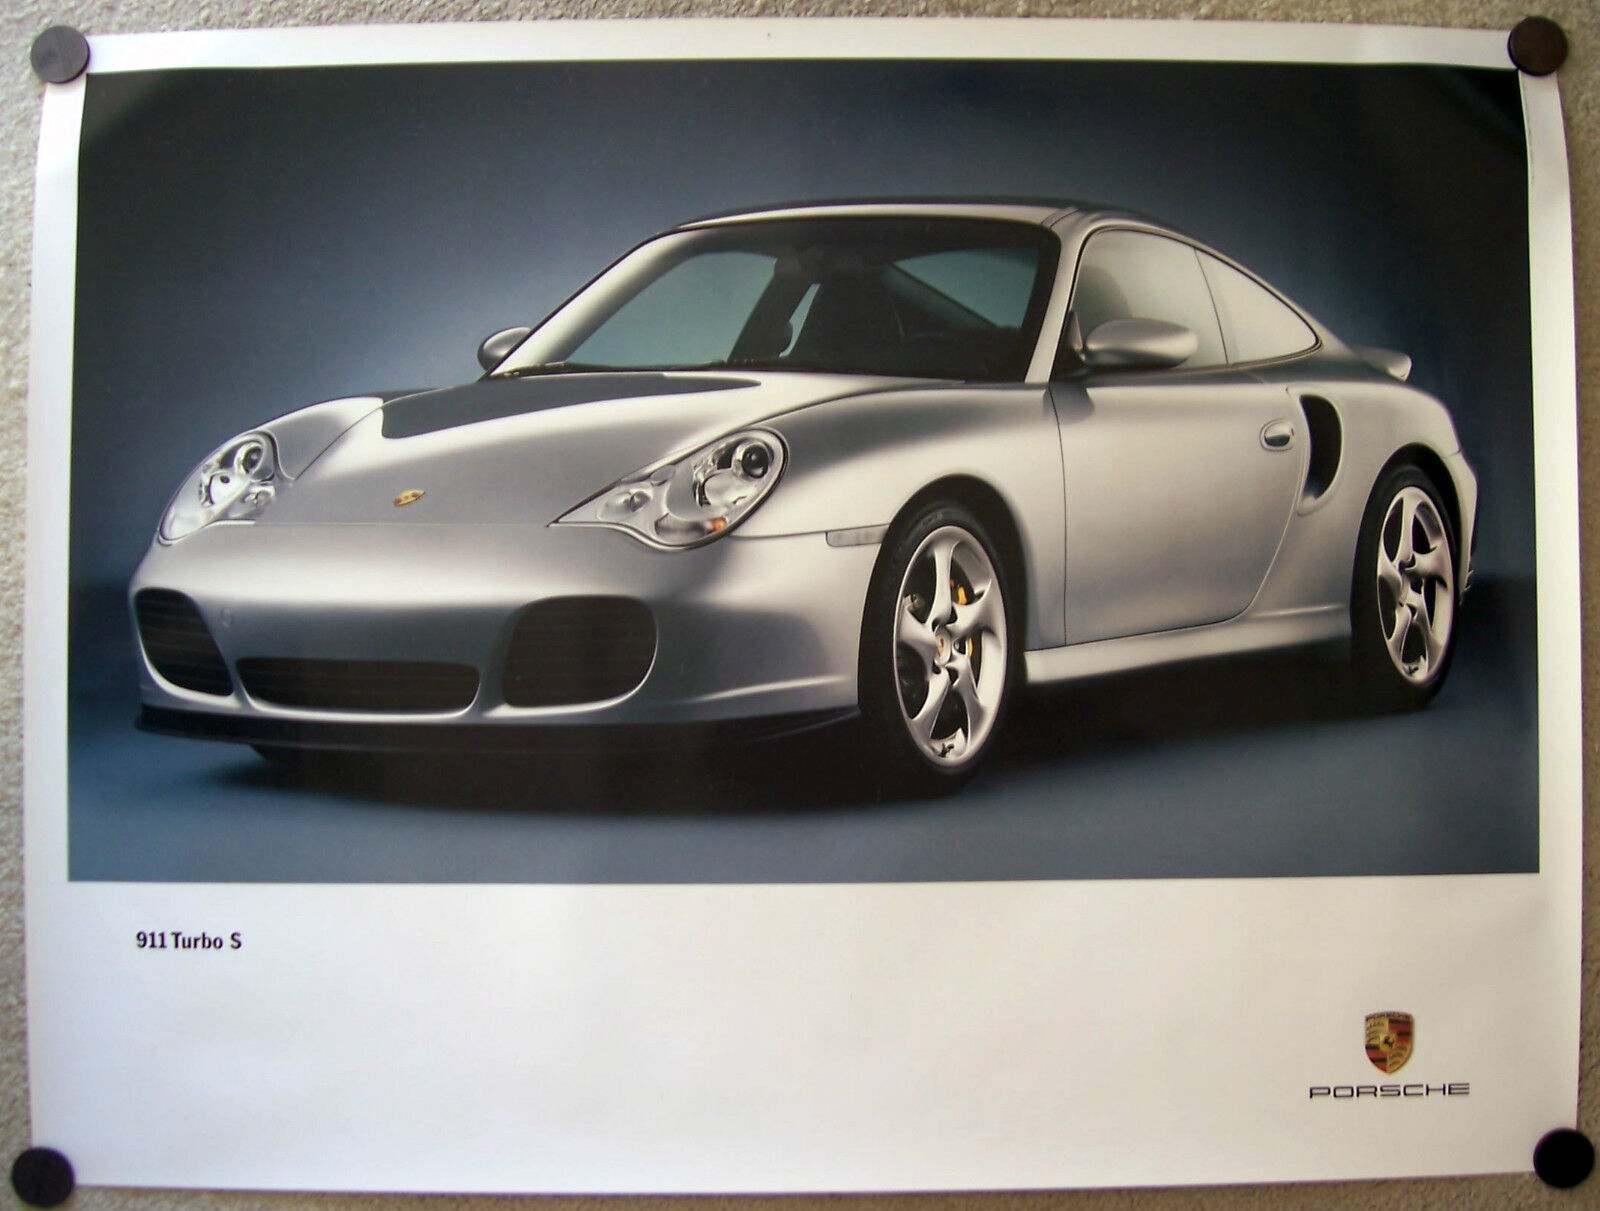 PORSCHE OFFICIAL 911 996 TURBO S OFFICIAL SHOWROOM POSTER 2005